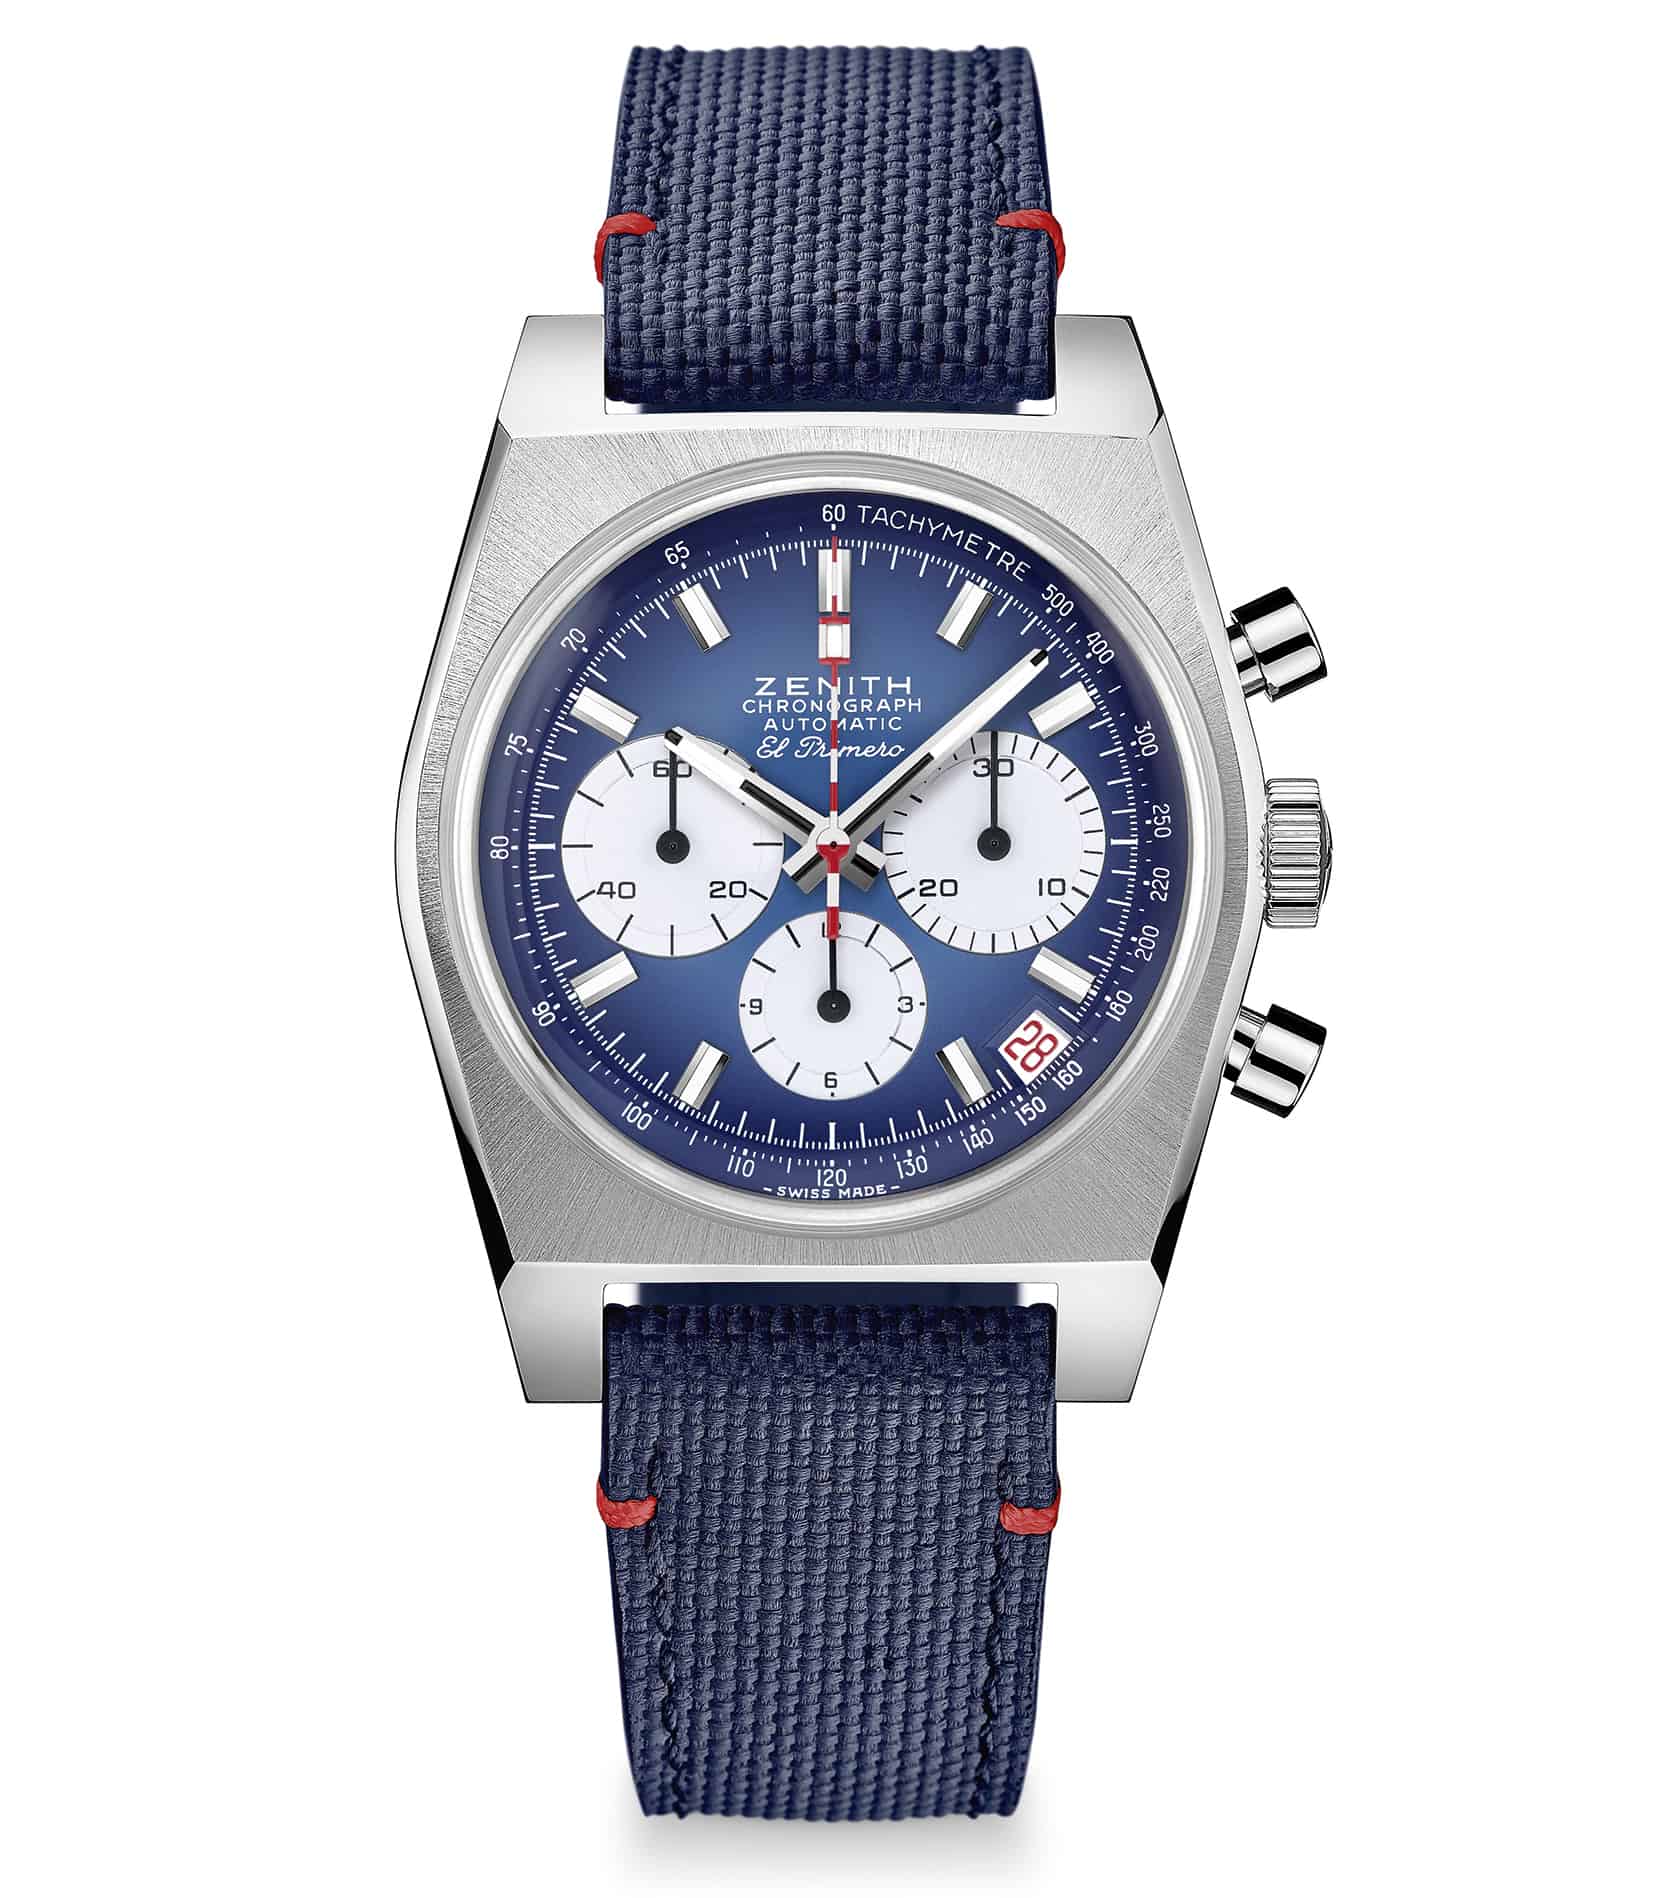 Introducing The Zenith A384 Revival Liberty